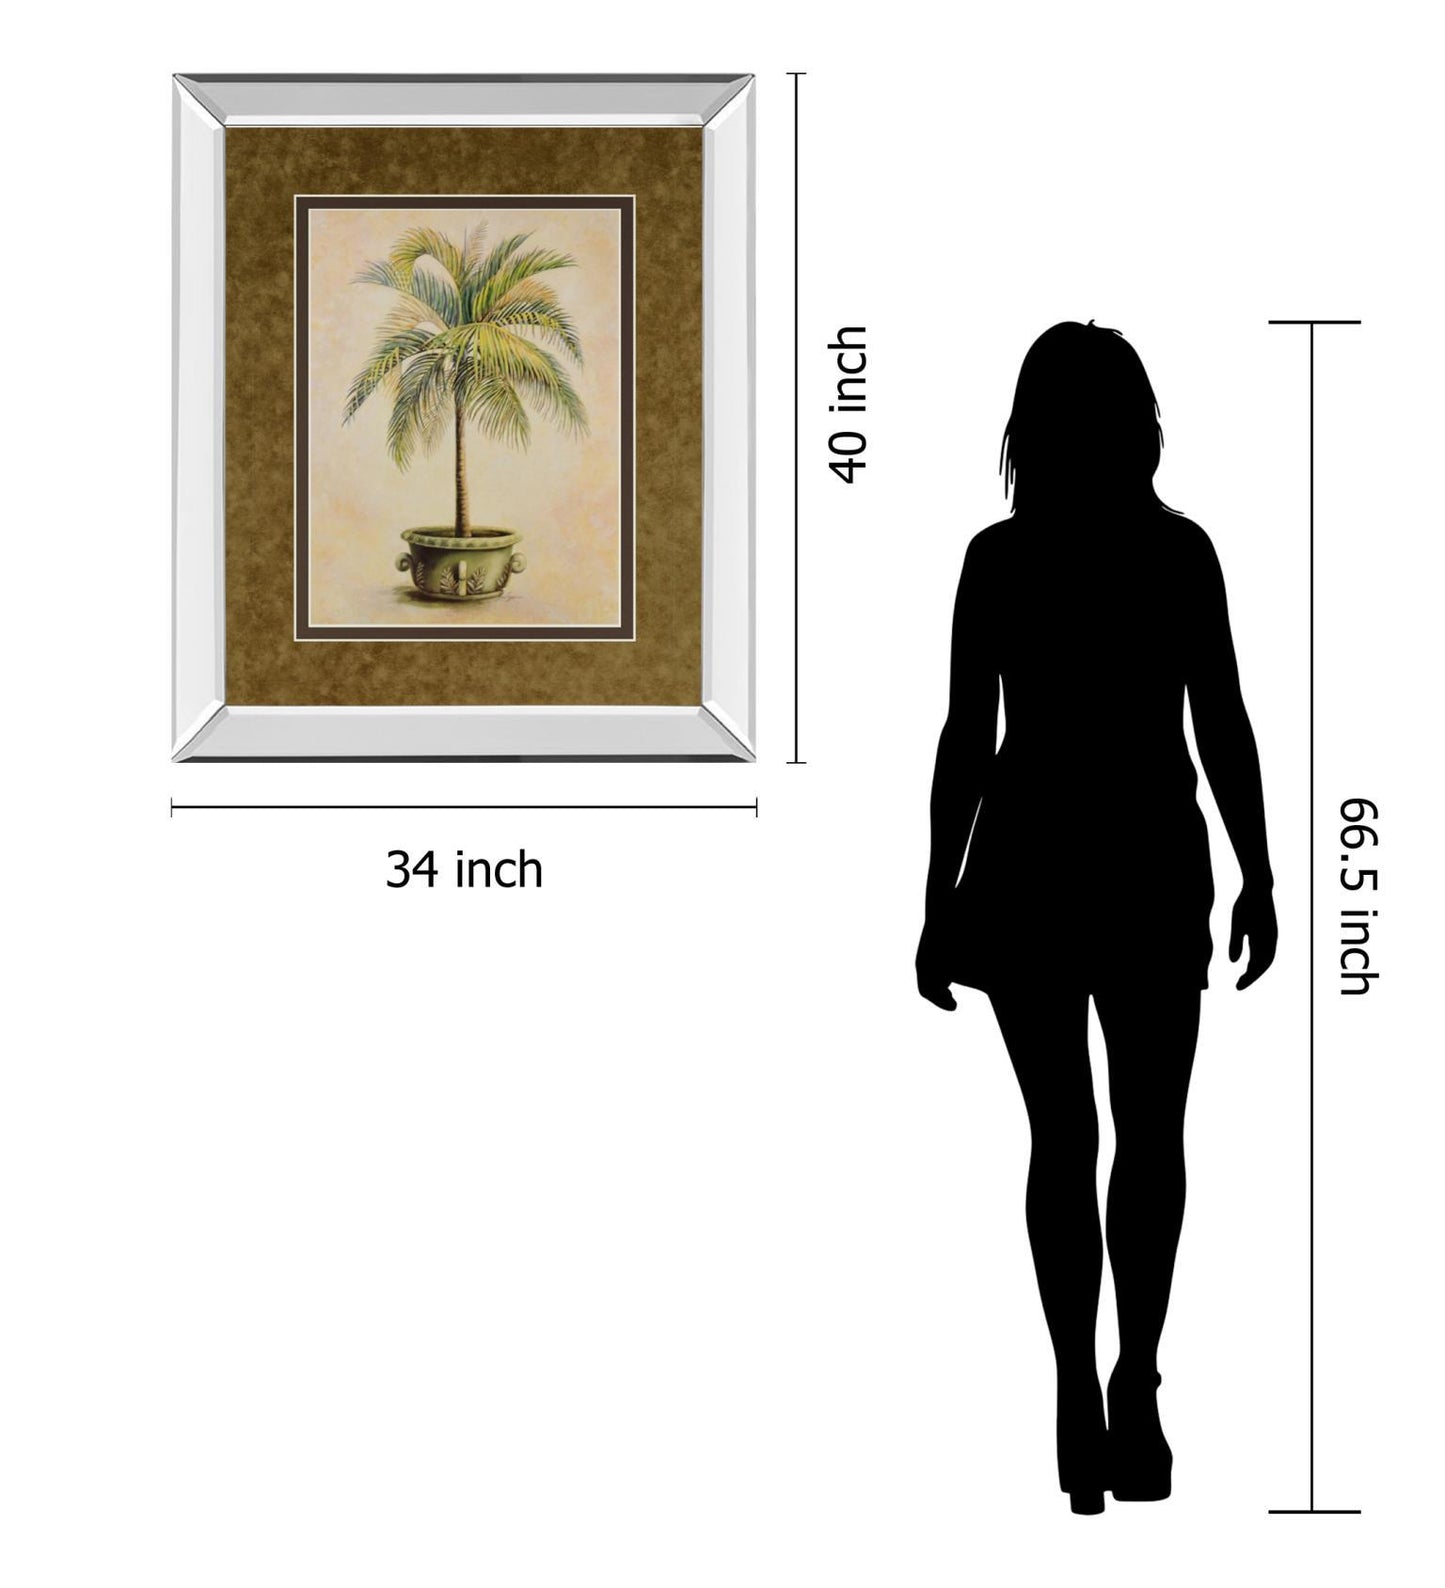 Potted Palm Il - Mirror Framed Print Wall Art - Green